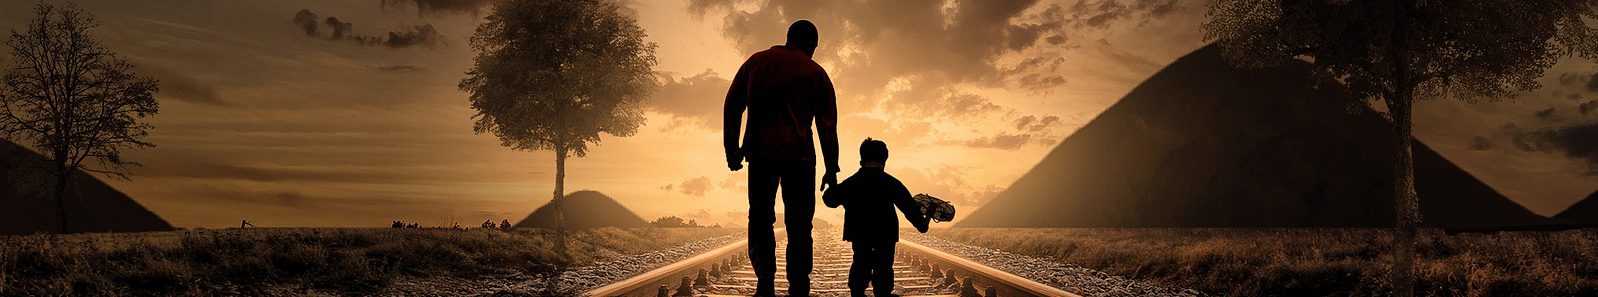 father-and-son-2258681_1920